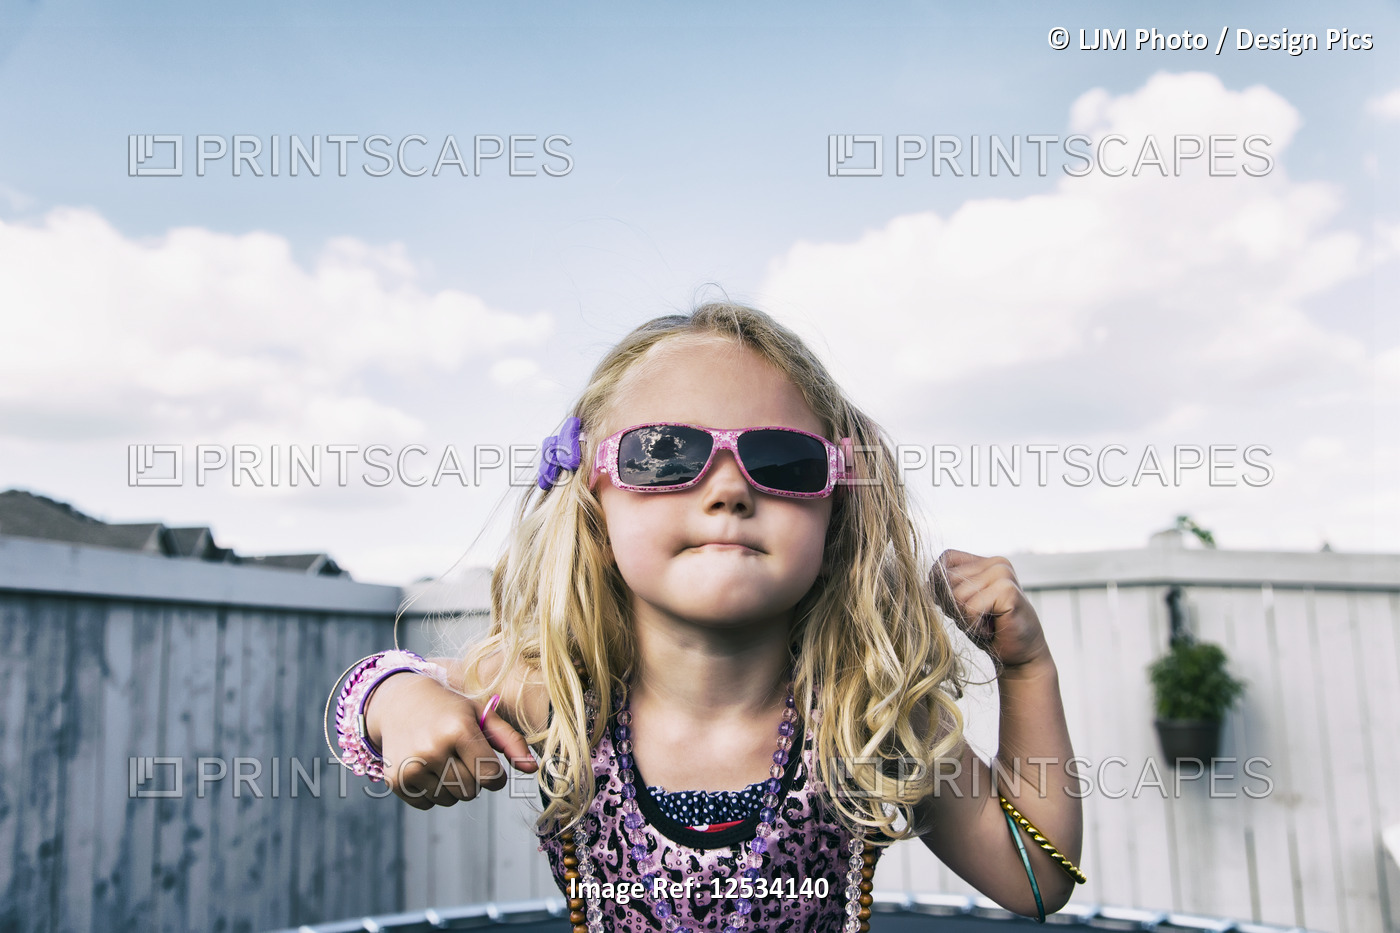 A young girl all dressed up with blond curly hair, sunglasses and jewelry ...